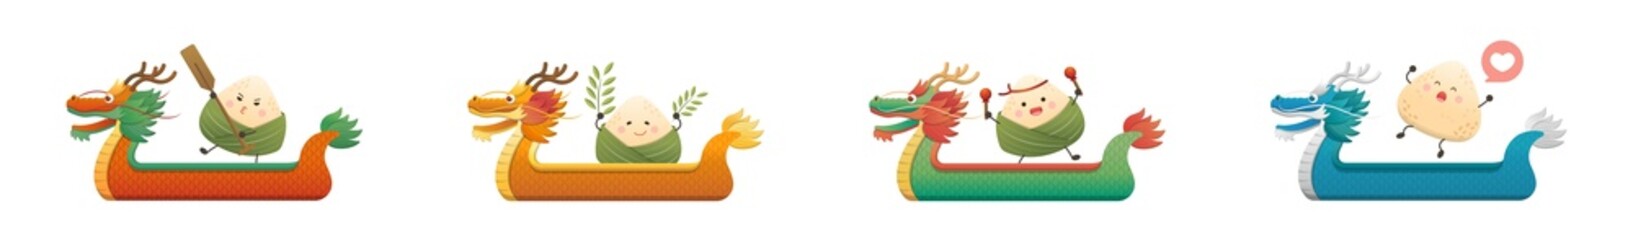 4 Dragon Boat Shapes and Chinese Dragon Boat Festival Traditional Food: Zongzi, Cute and Playful Mascot Characters